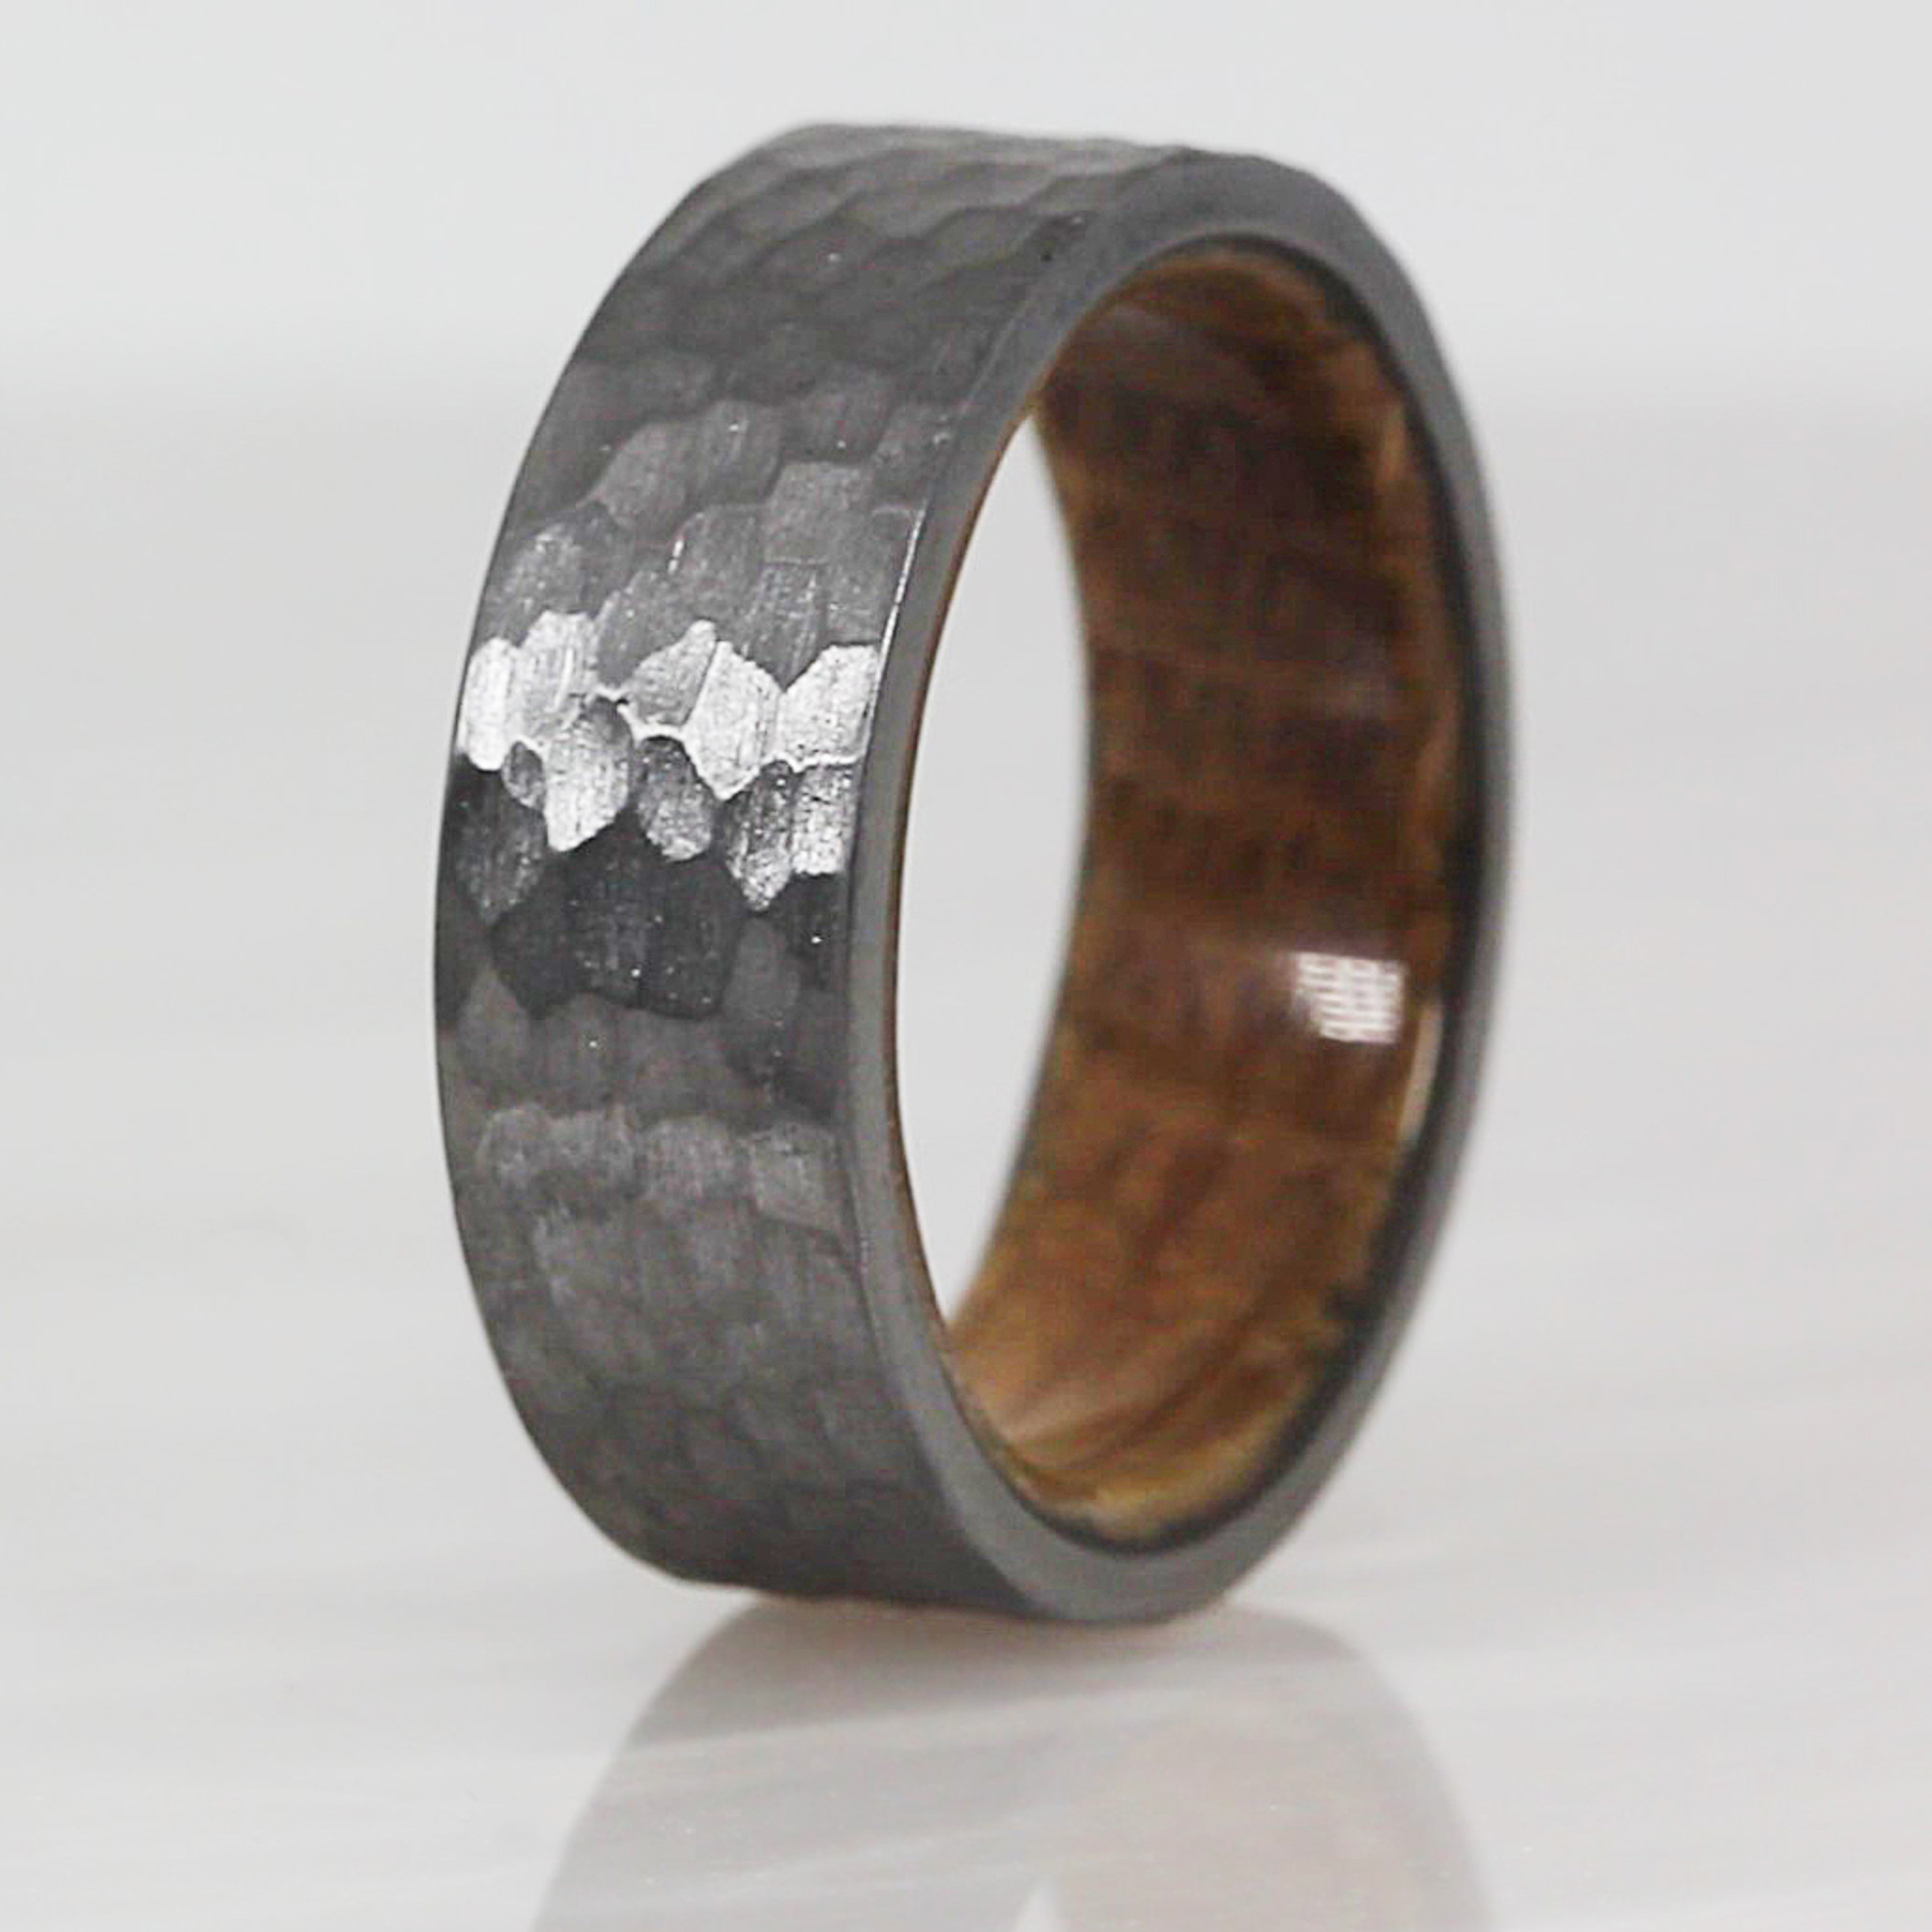 Hammered Tantalum Wedding Band with Whiskey Wood Sleeve (it's really cool!)